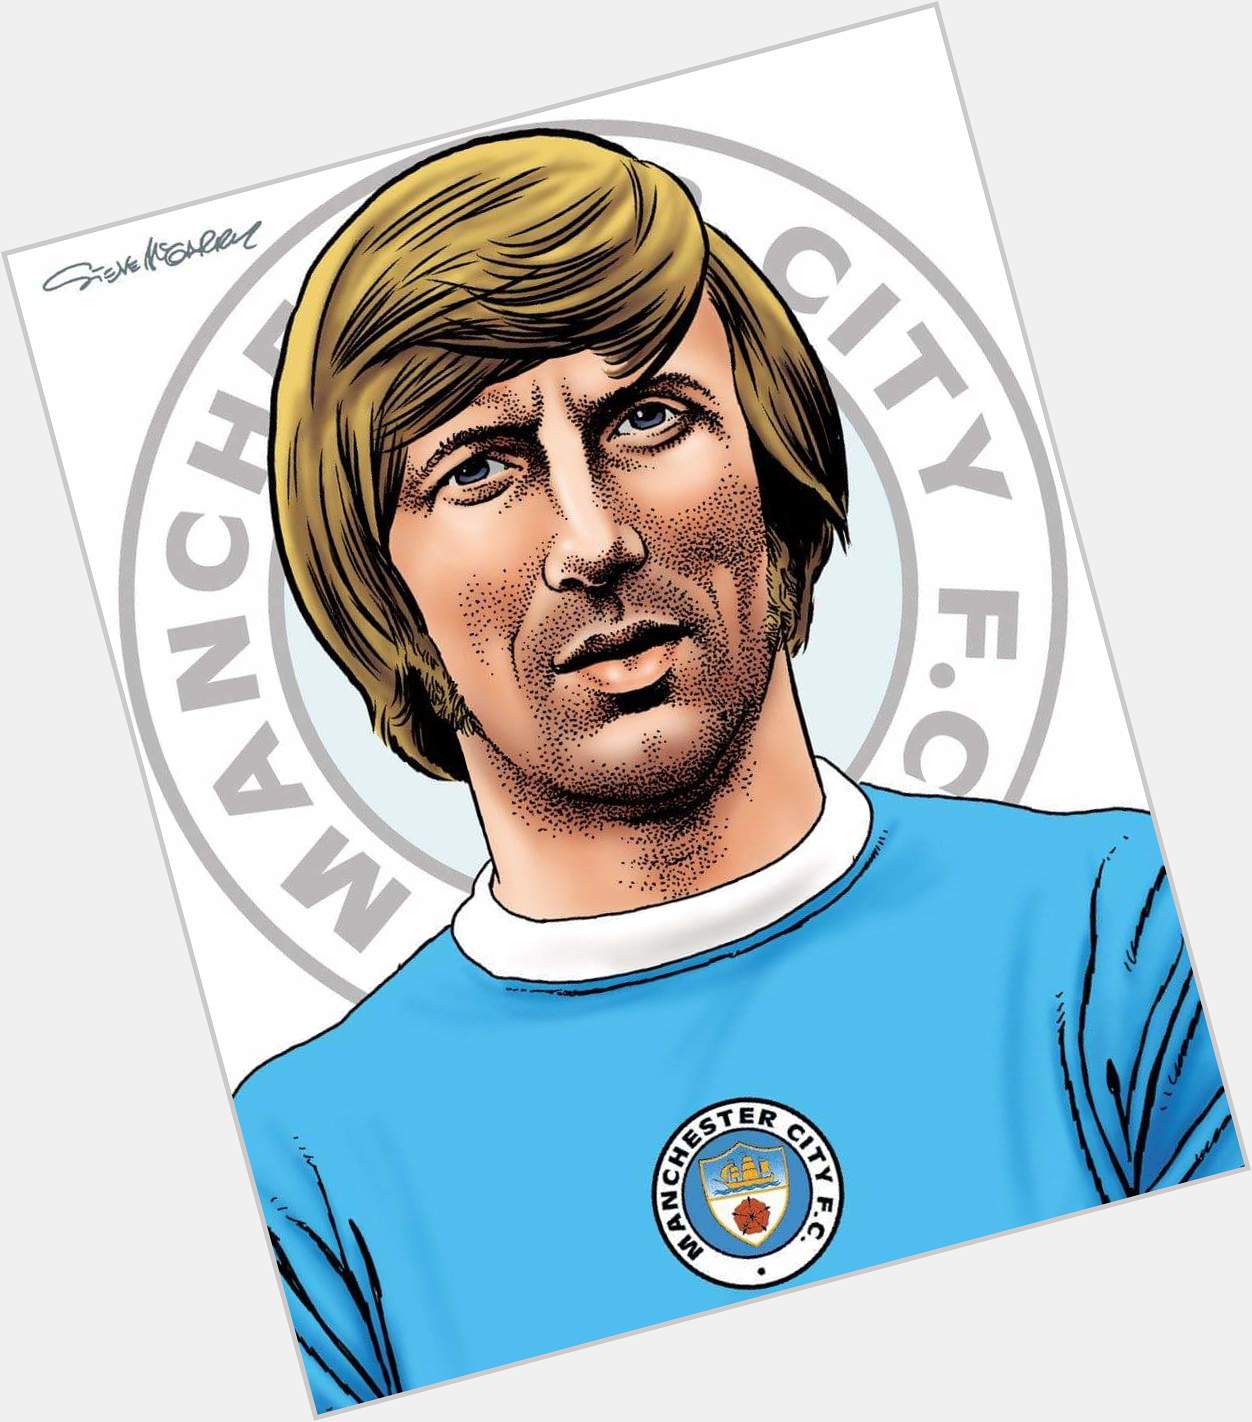 Happy birthday to legend Colin Bell, would have loved to have seen him in his prime 